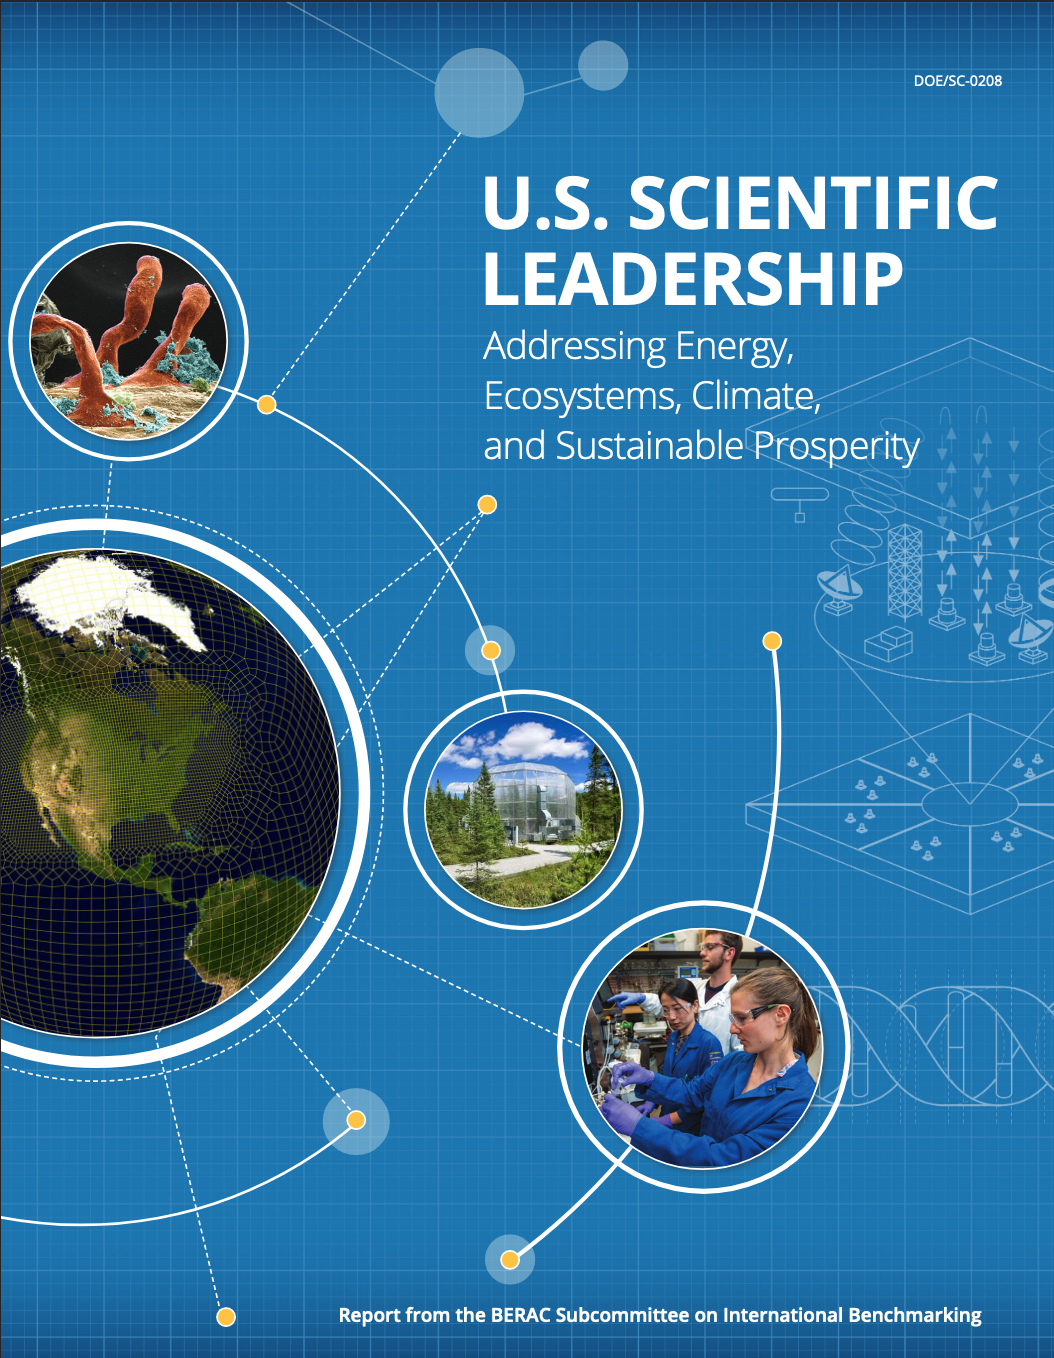 document cover that reads "U.S. Scientific Leadership: Addressing Energy, Ecosystems, Climate, and Sustainable Prosperity"